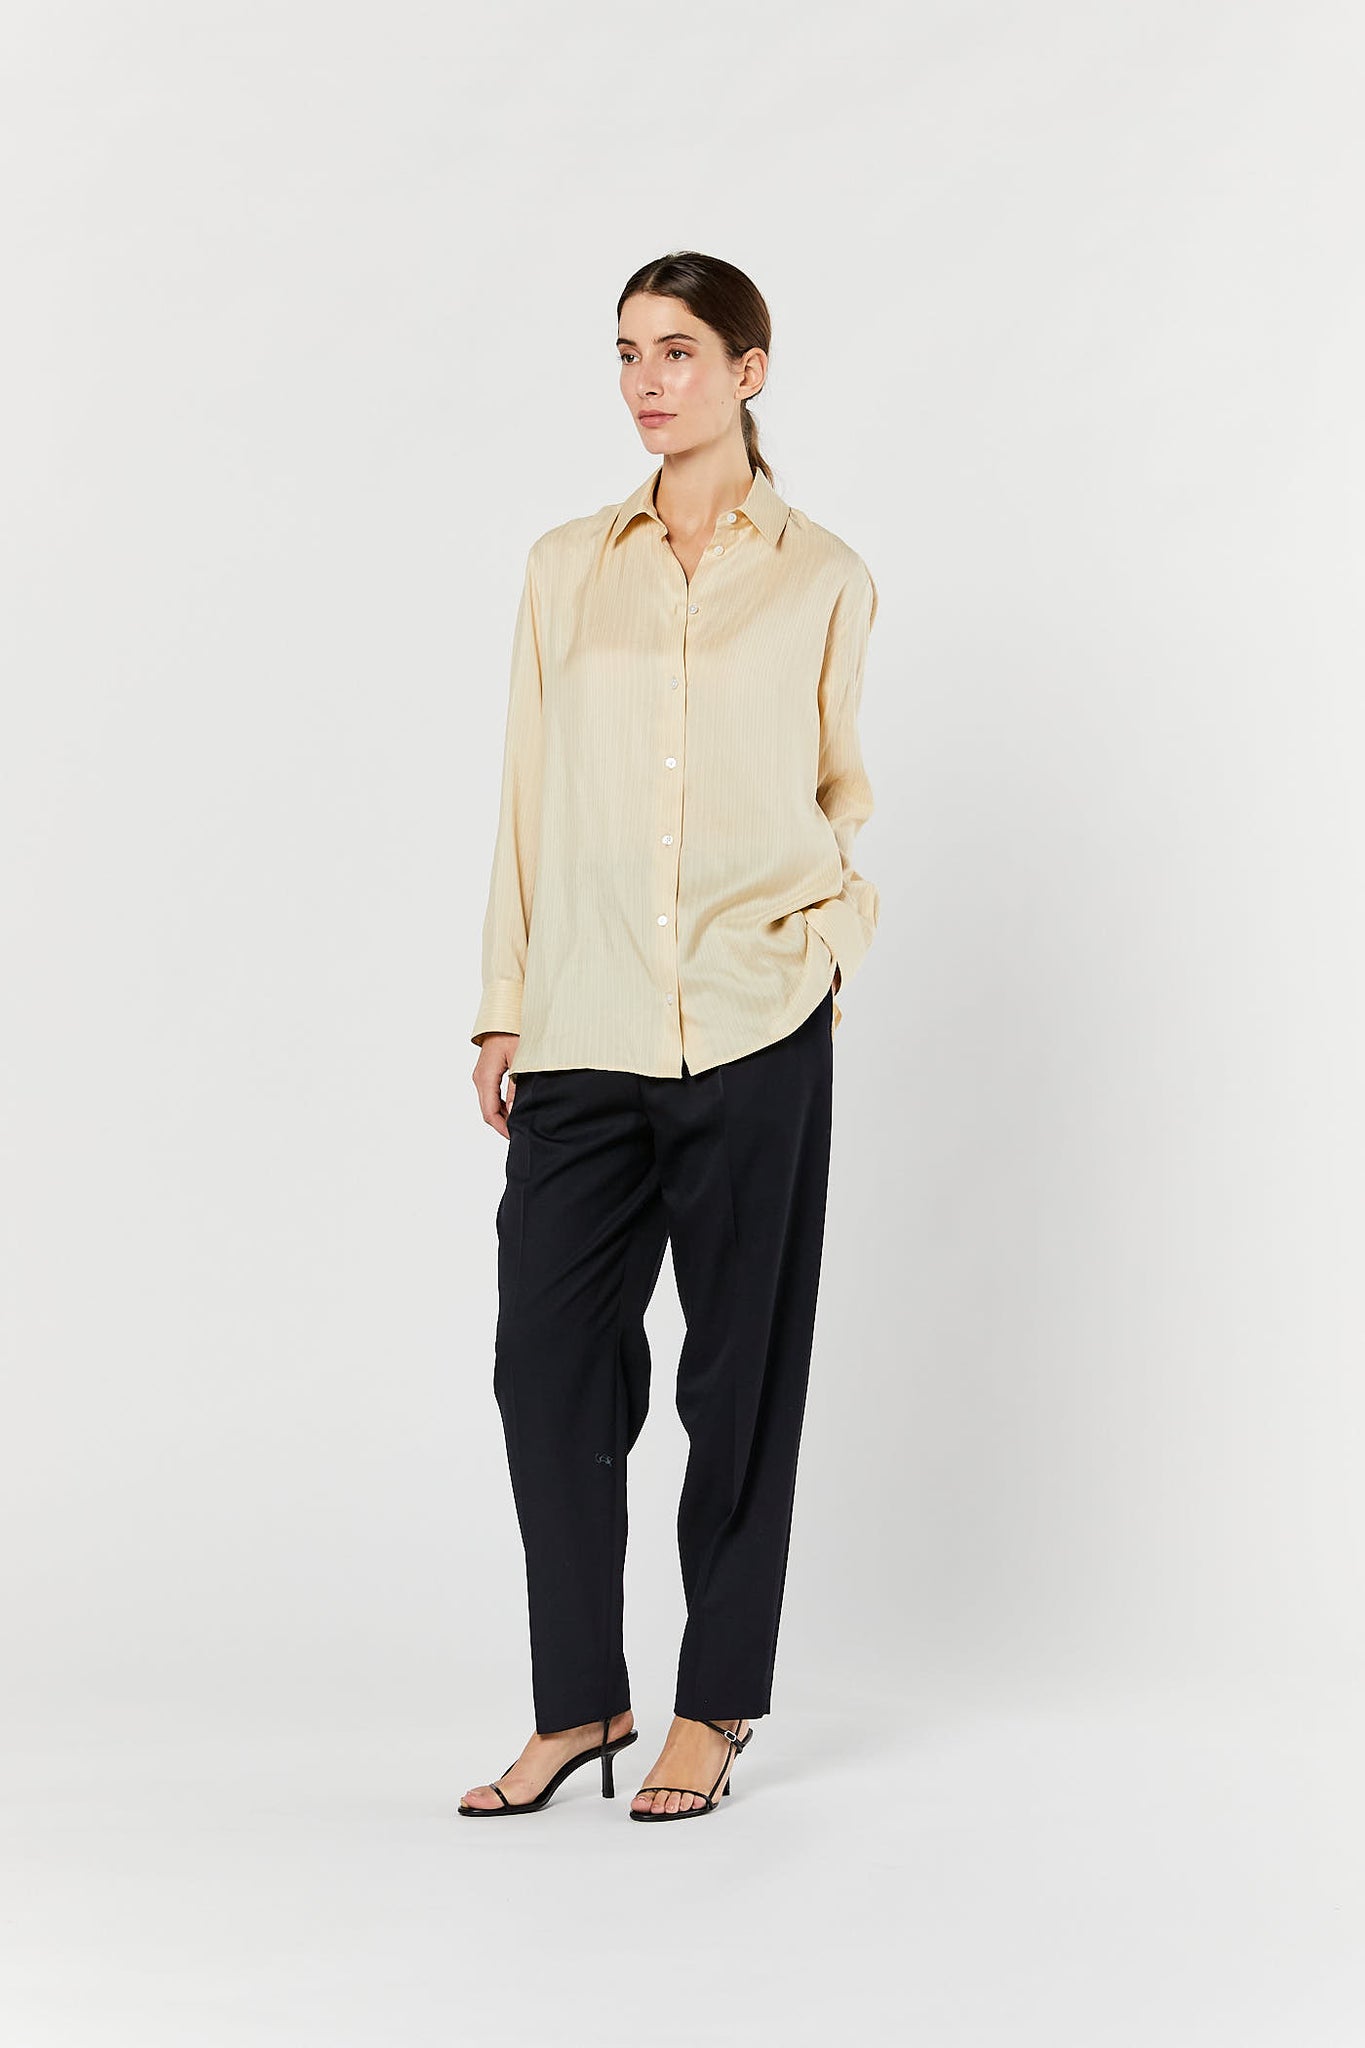 Women's New Arrivals – Page 4 – ByGeorge